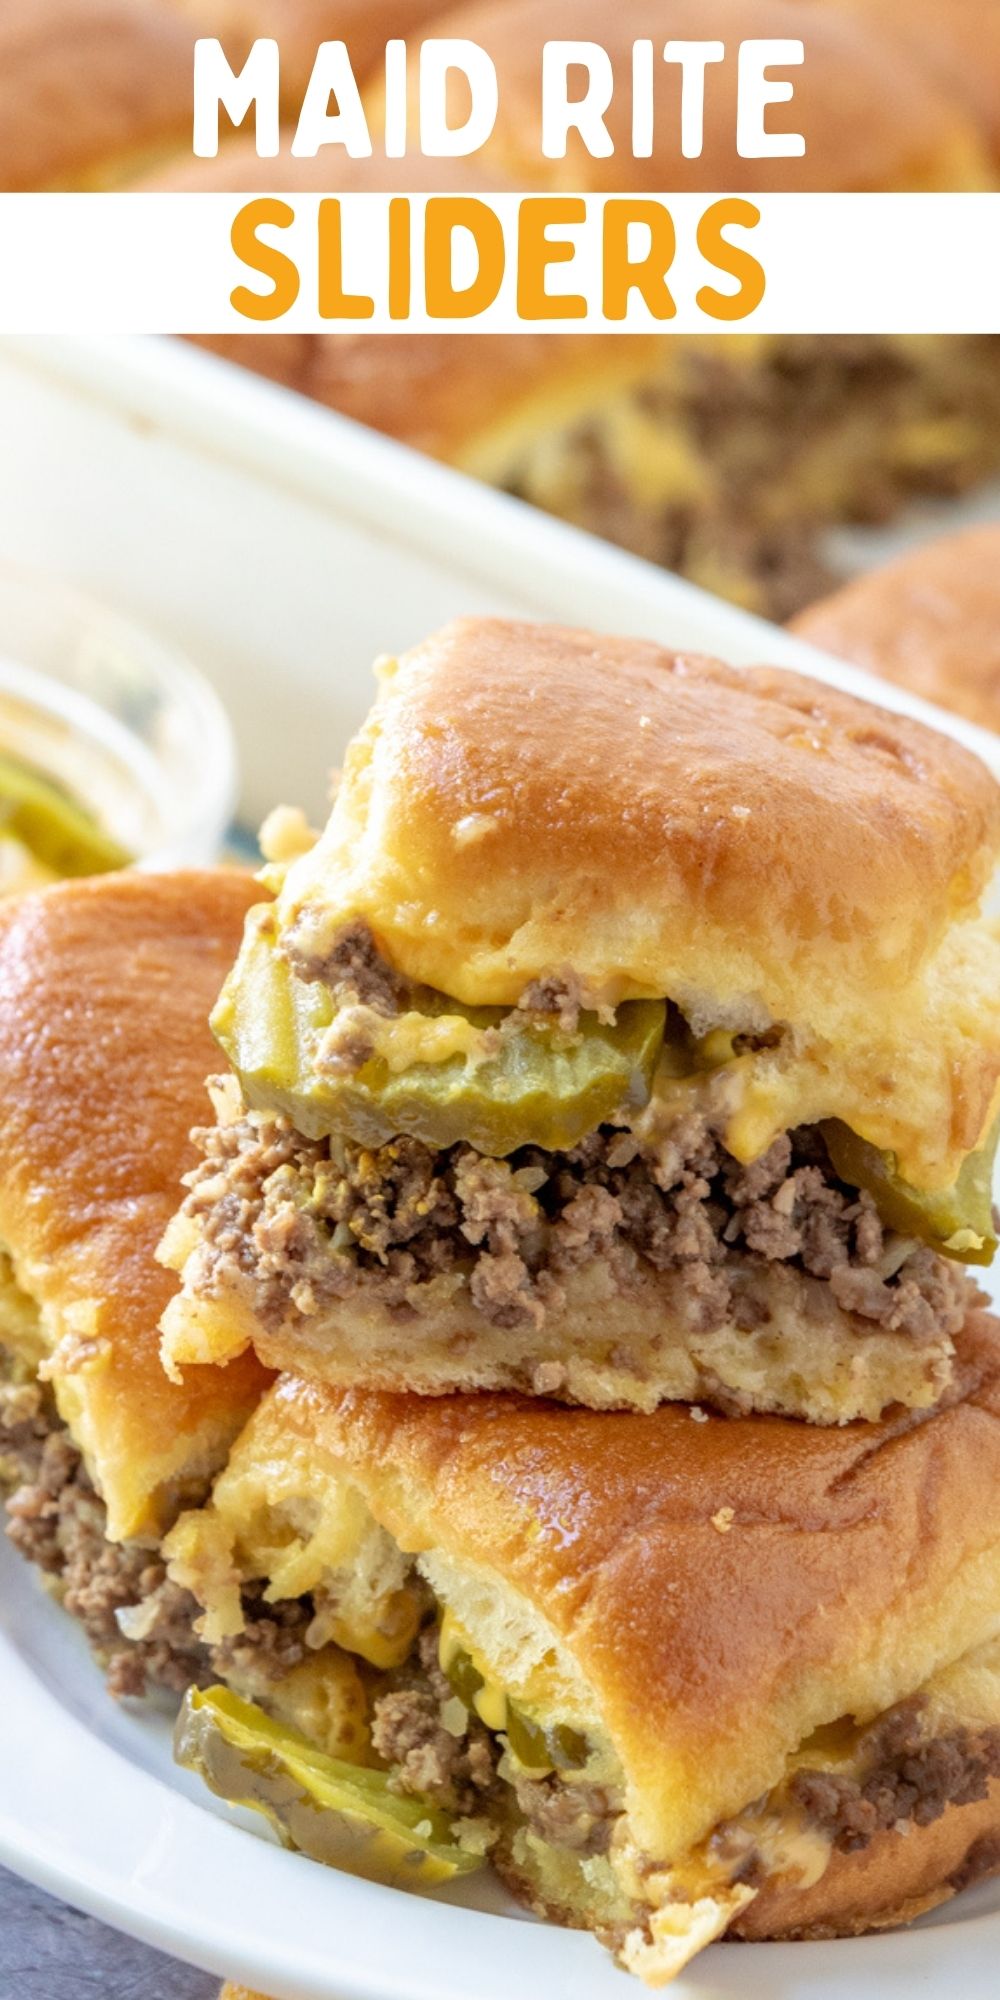 My Maid-Rite Sliders have the one-of-a-kind flavor of this Midwestern classic in a handy slider form. You can whip up a whole tray of them for your next party in under an hour. via @familyfresh